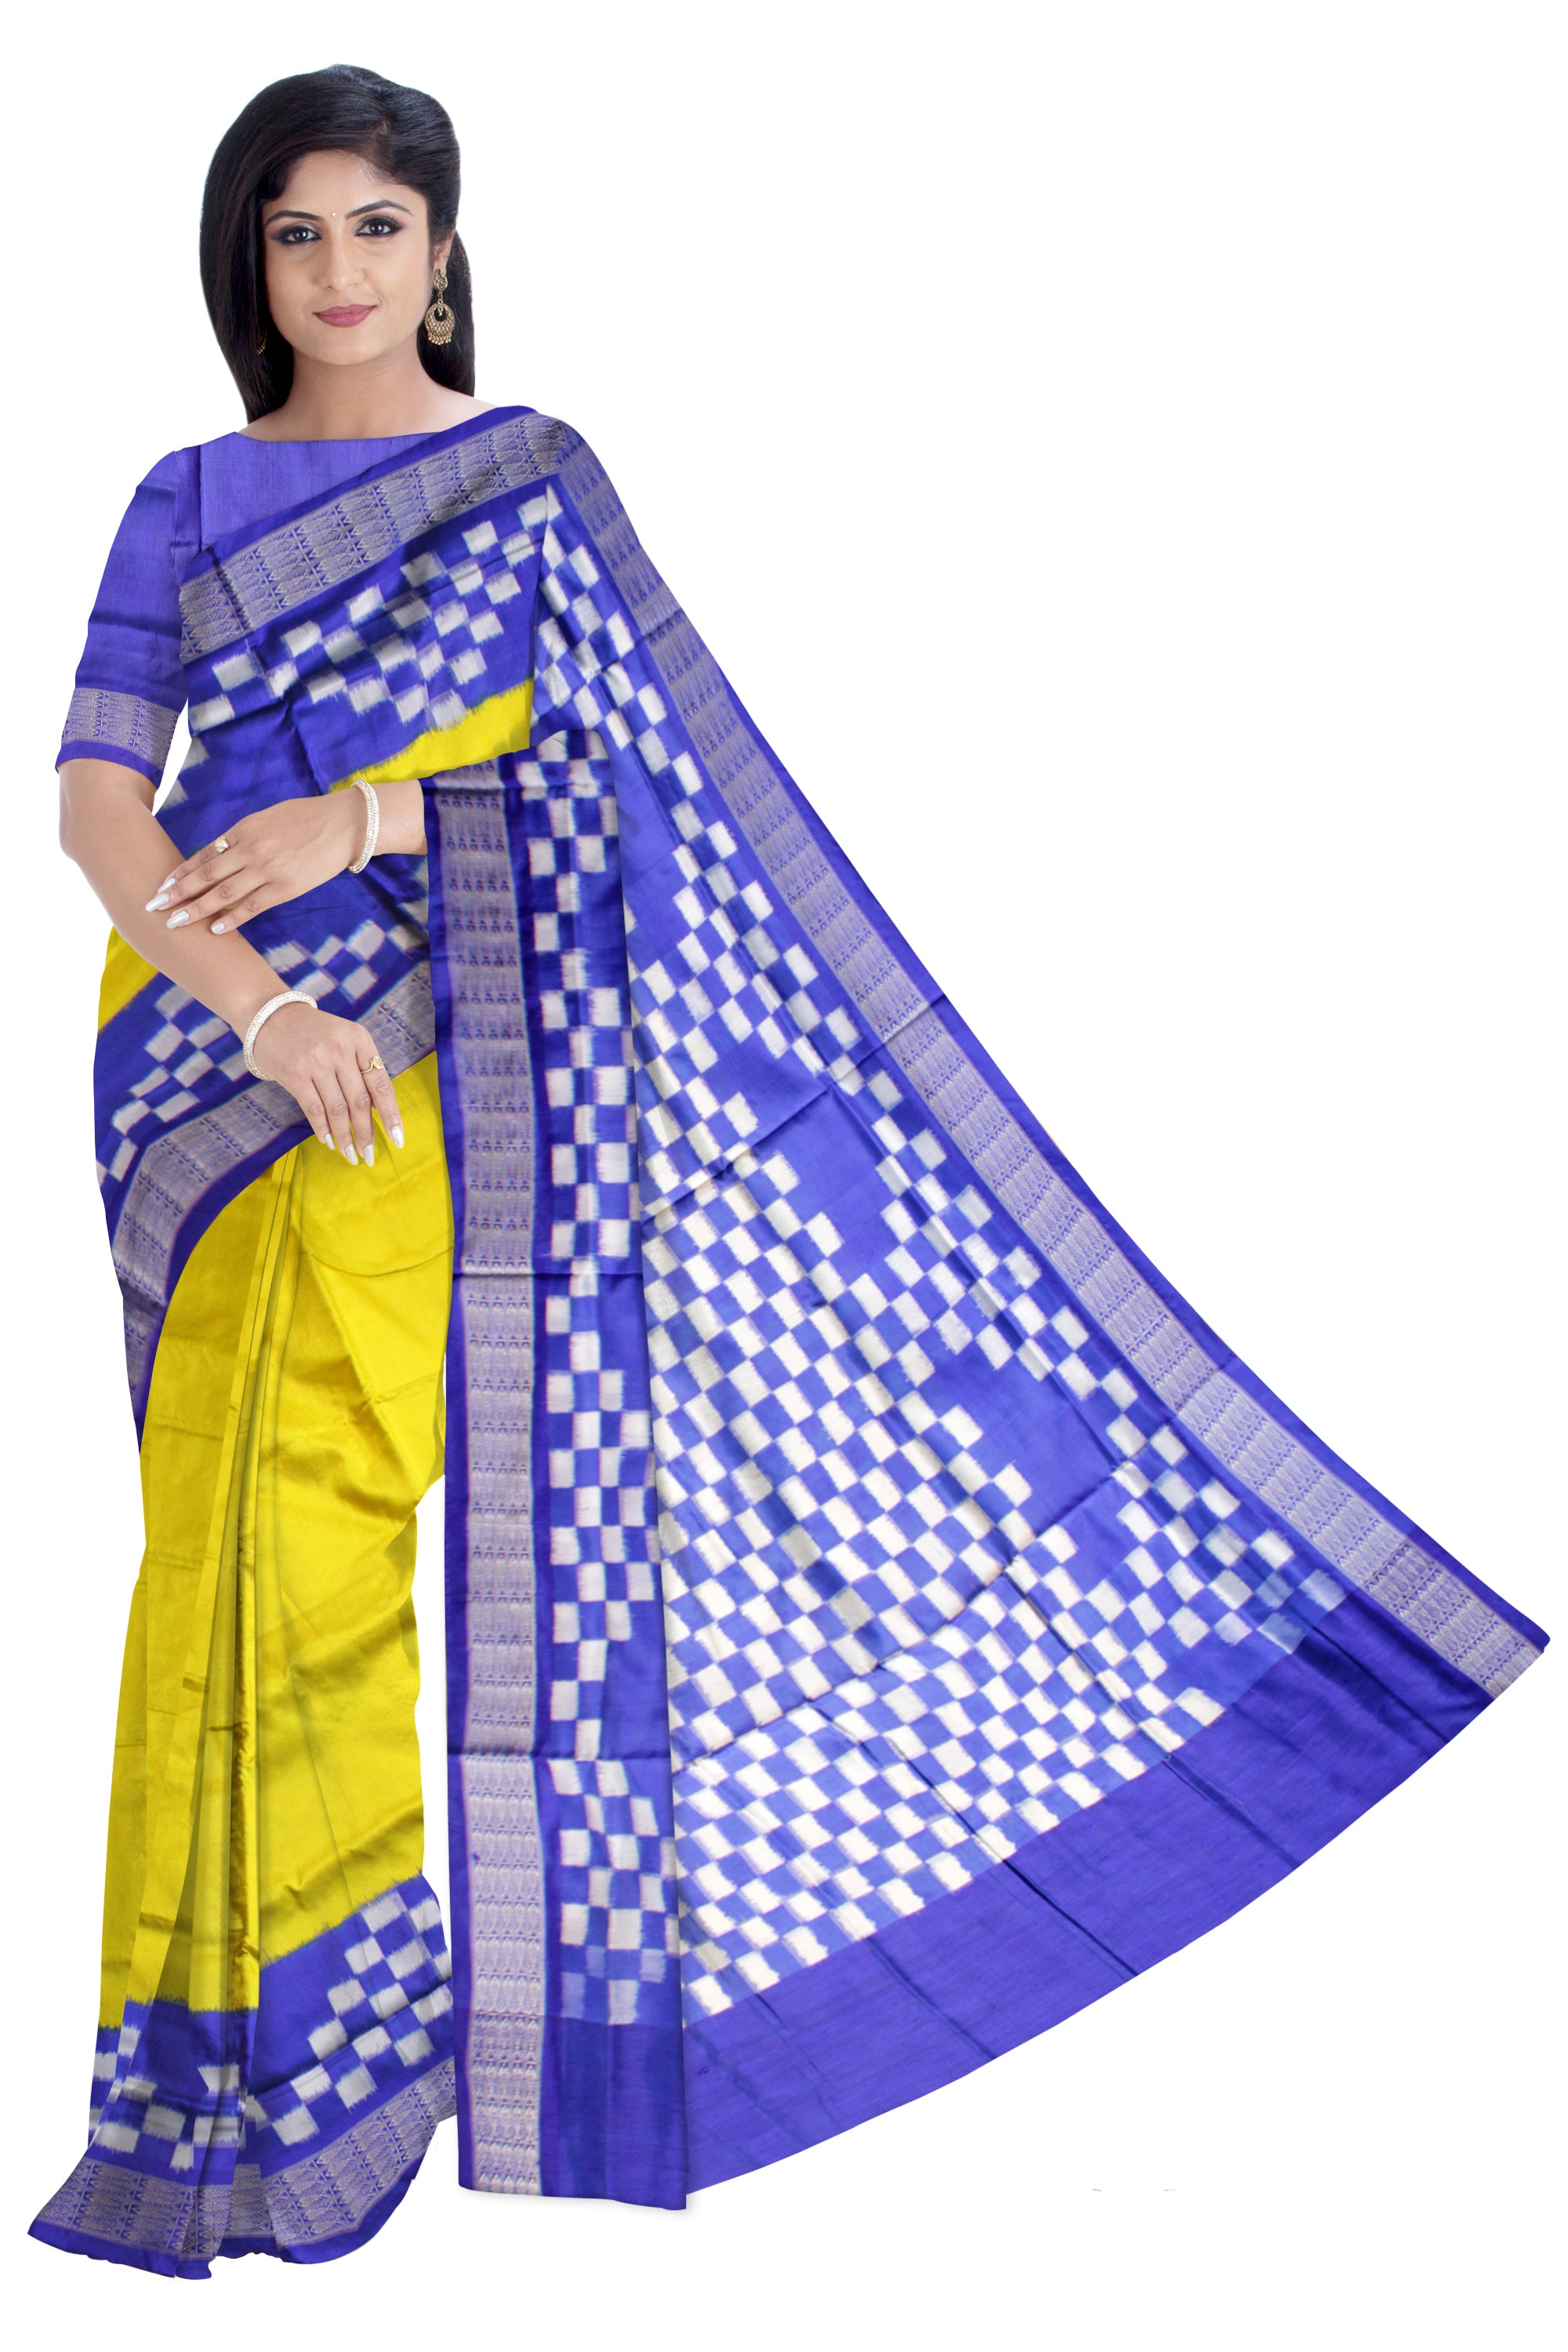 LATEST DHADI SAPTA PATTERN PURE SILK SAREE IS YELLOW AND BLUE COLOR BASE,AVAILABLE WITH MATCHING BLOUSE PIECE. - Koshali Arts & Crafts Enterprise